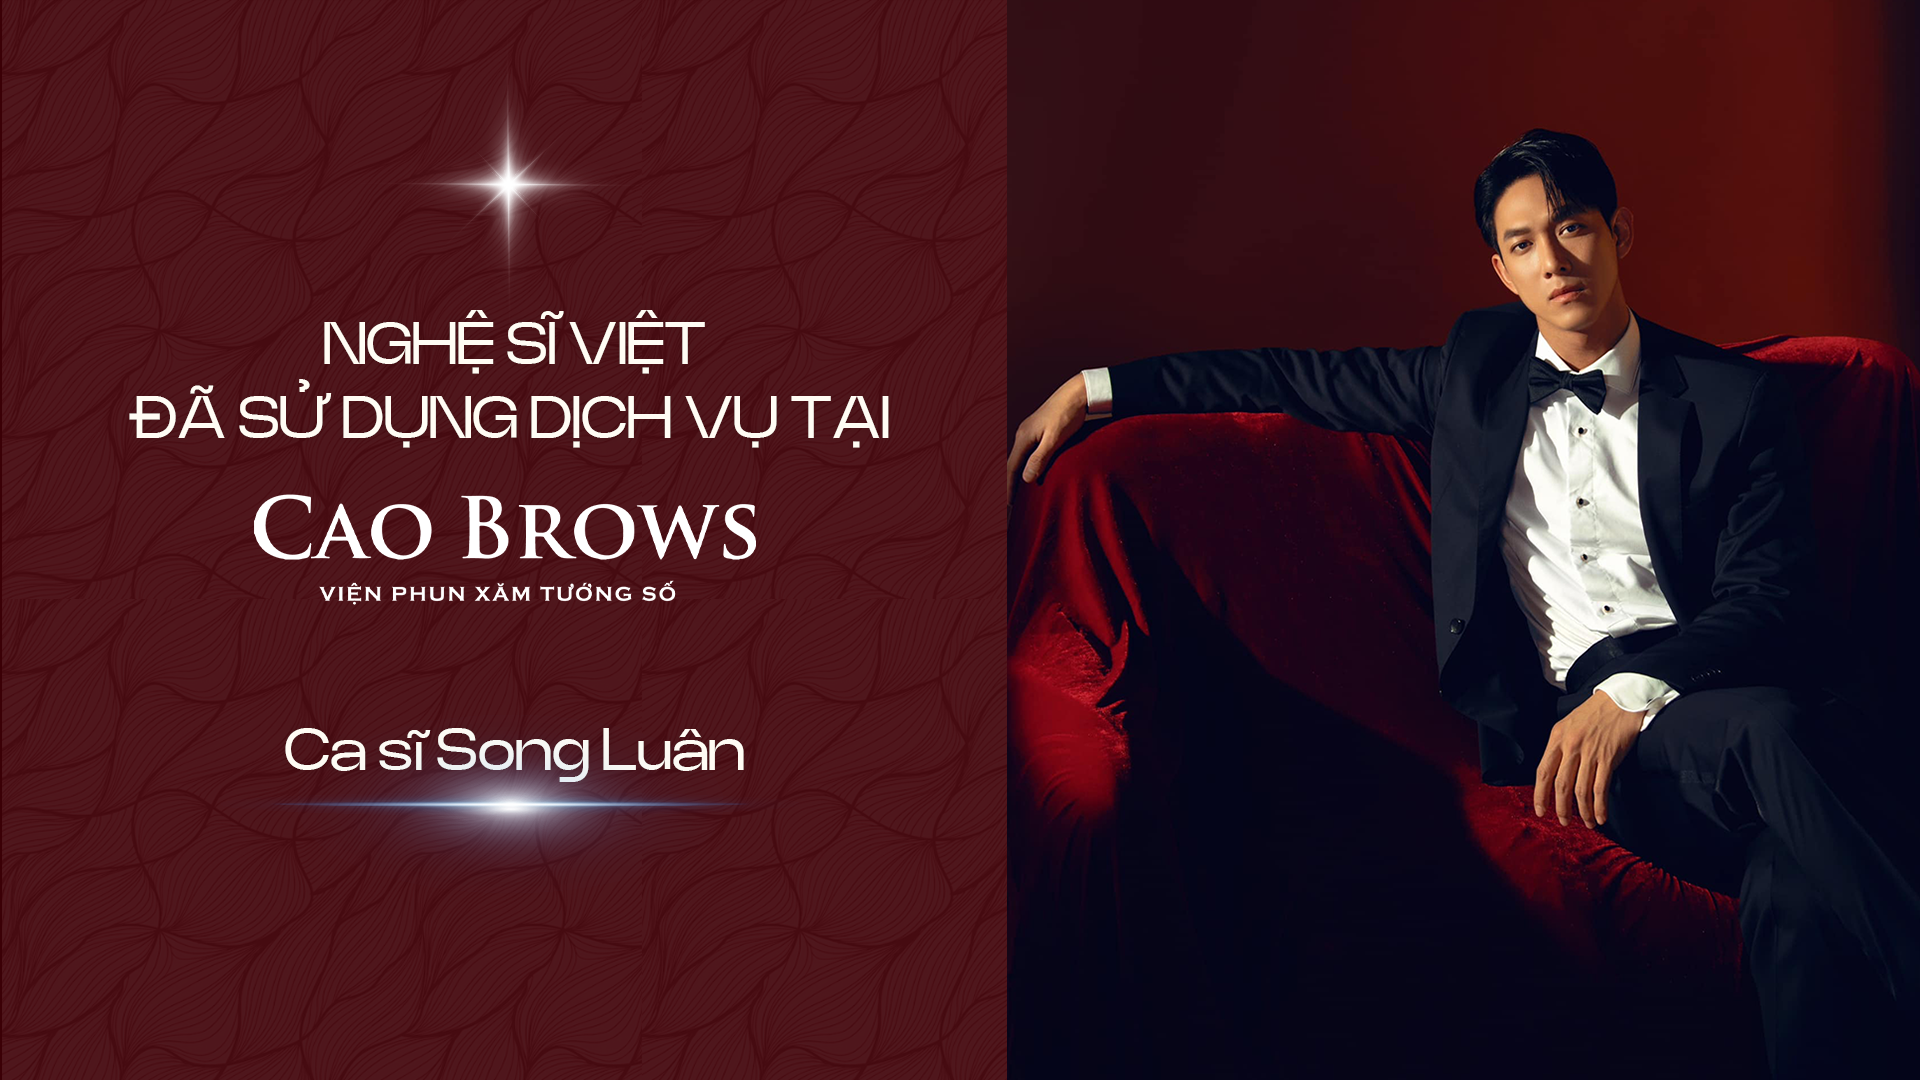 Cao Brows Banner Image - Song Luan